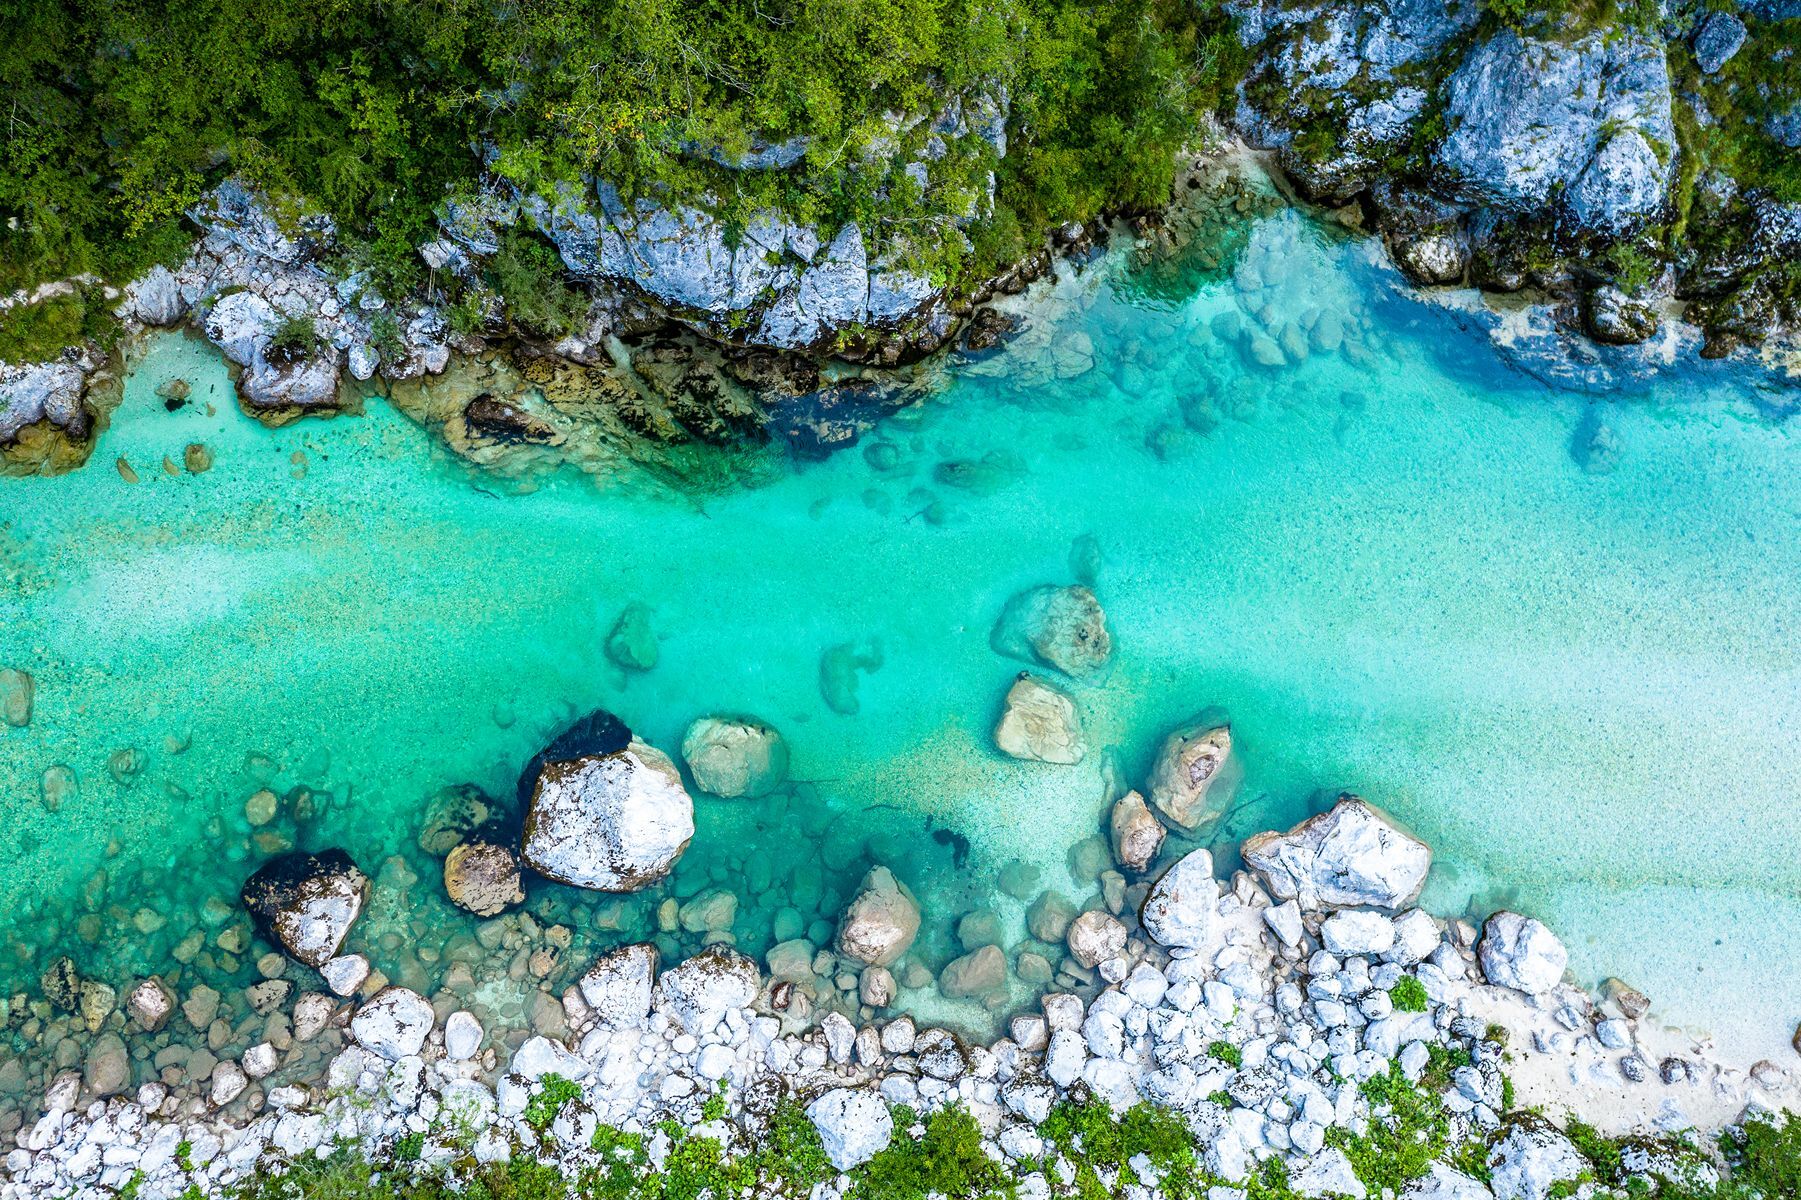 <p>The <a href="https://www.soca-valley.com/en/soca-valley/">Soča Valley</a> offers breathtaking scenery, and is well known for the crystal waters of the Soca River, which cuts through Slovenia’s mountainscapes. If you plan on rafting or kayaking along the <a href="https://www.slovenia.info/en/places-to-go/attractions/soca-valley">Soča River</a>, the pretty village of Bovec is an excellent starting point. History buffs will be captivated by the remnants of World War I trenches—a reminder of the region’s tumultuous past. Located in western Slovenia, the Soča Valley shines brightest in spring and summer, when wildflowers carpet its meadows in a blaze of colour. </p>